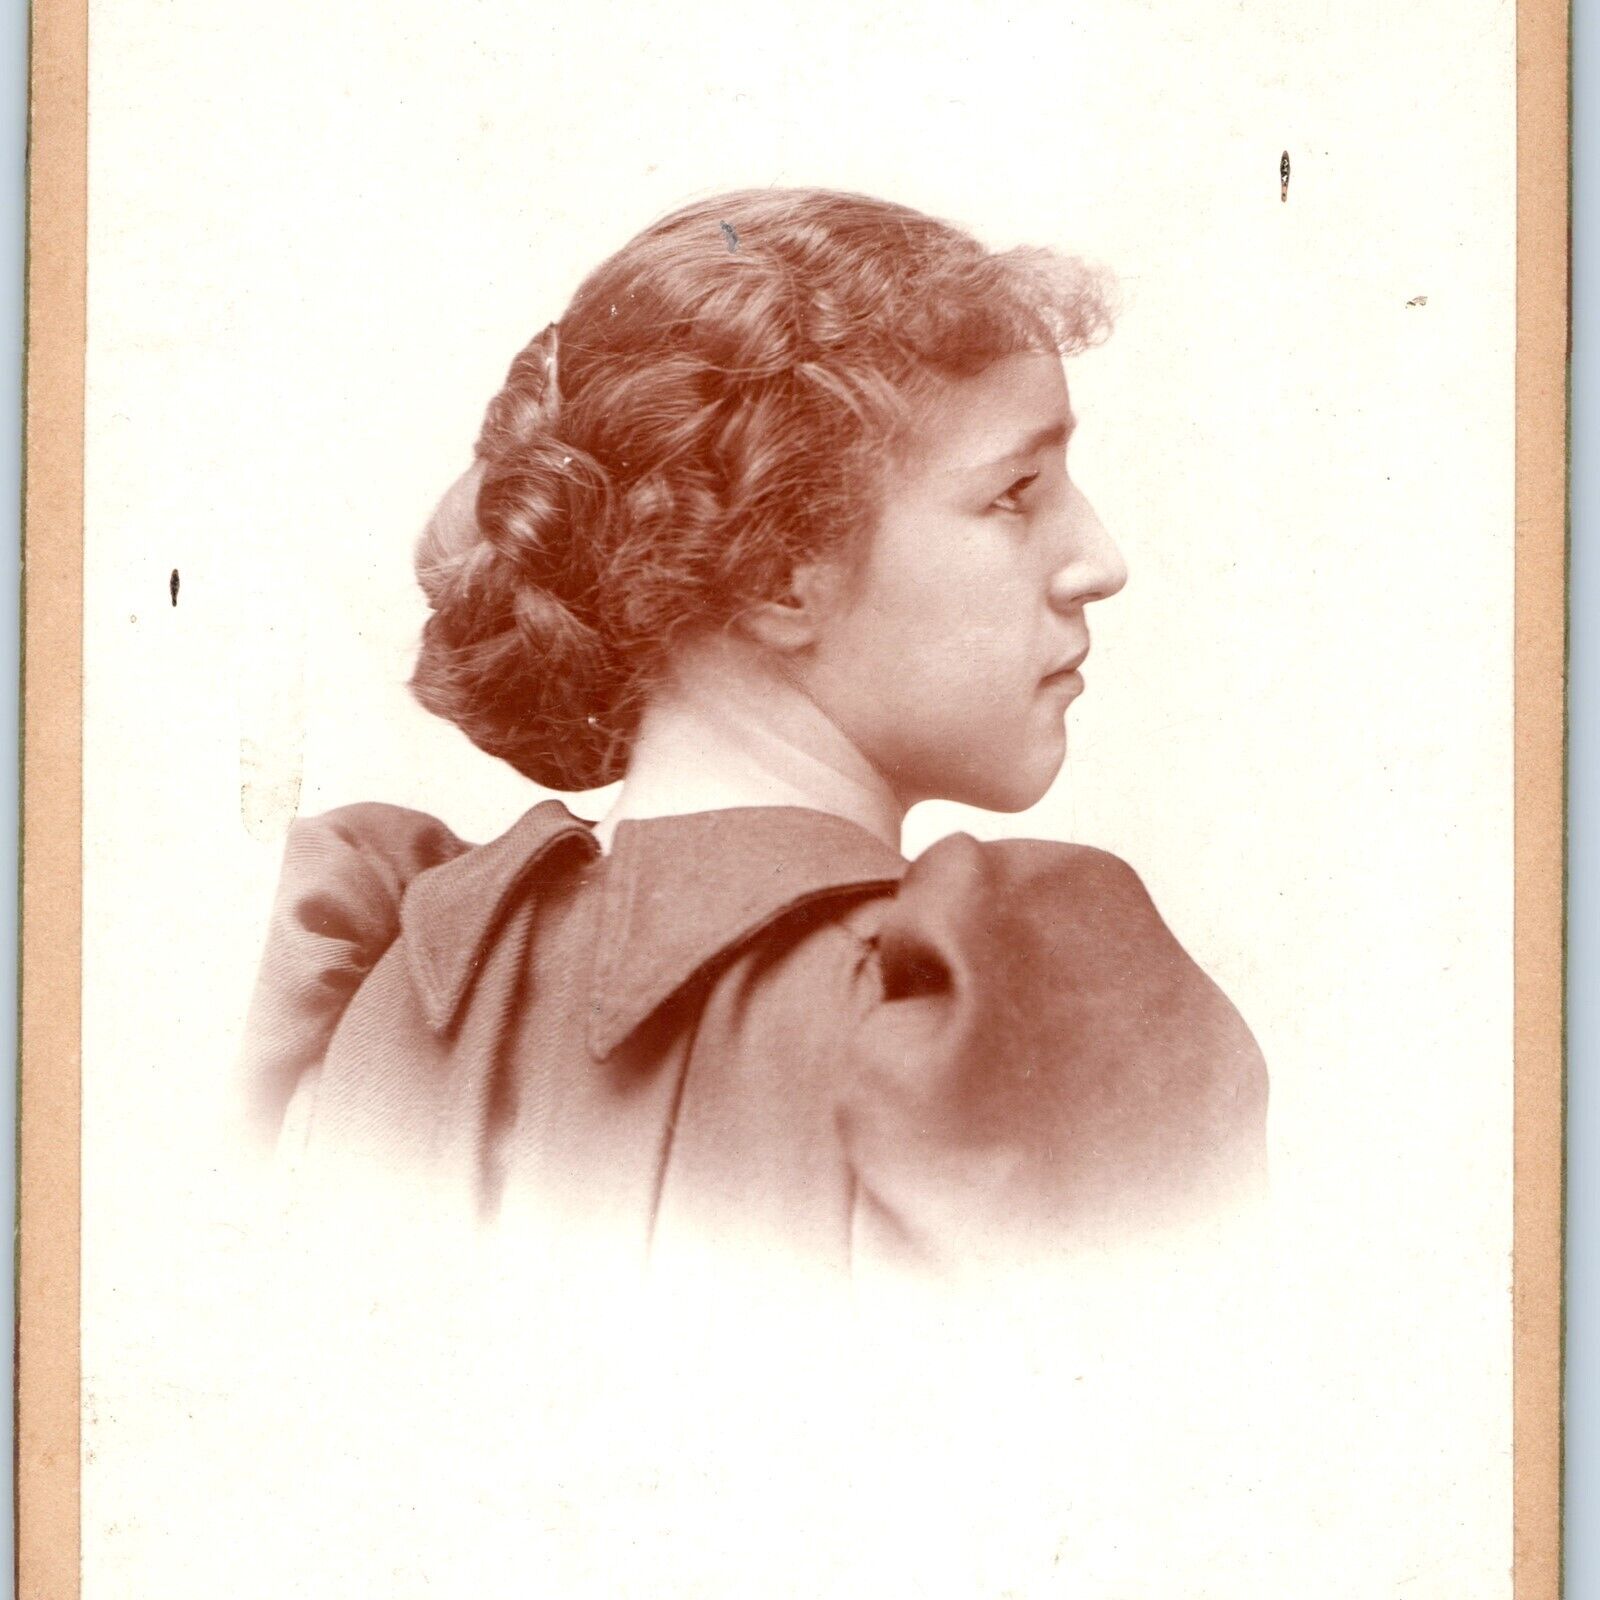 c1880s Silver Creek, NY Cute Side Profile of Girl Cabinet Card Photo Randall B17